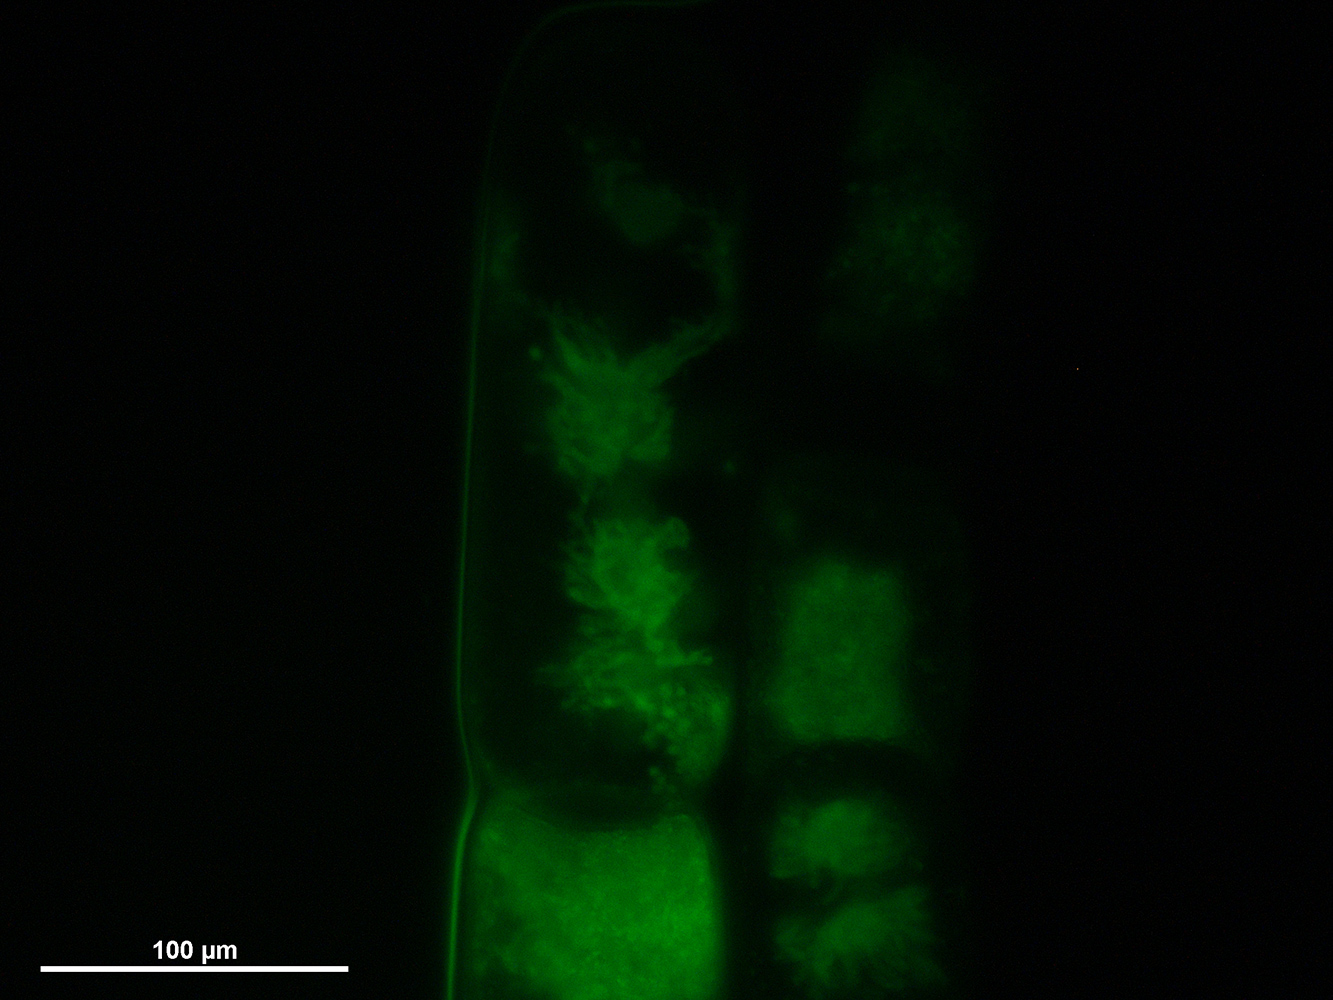 Green fluorescence image captured by Xuehuan Feng, featuring star-shaped chloroplast morphology in green algae (Zygnema circumcarinatum).